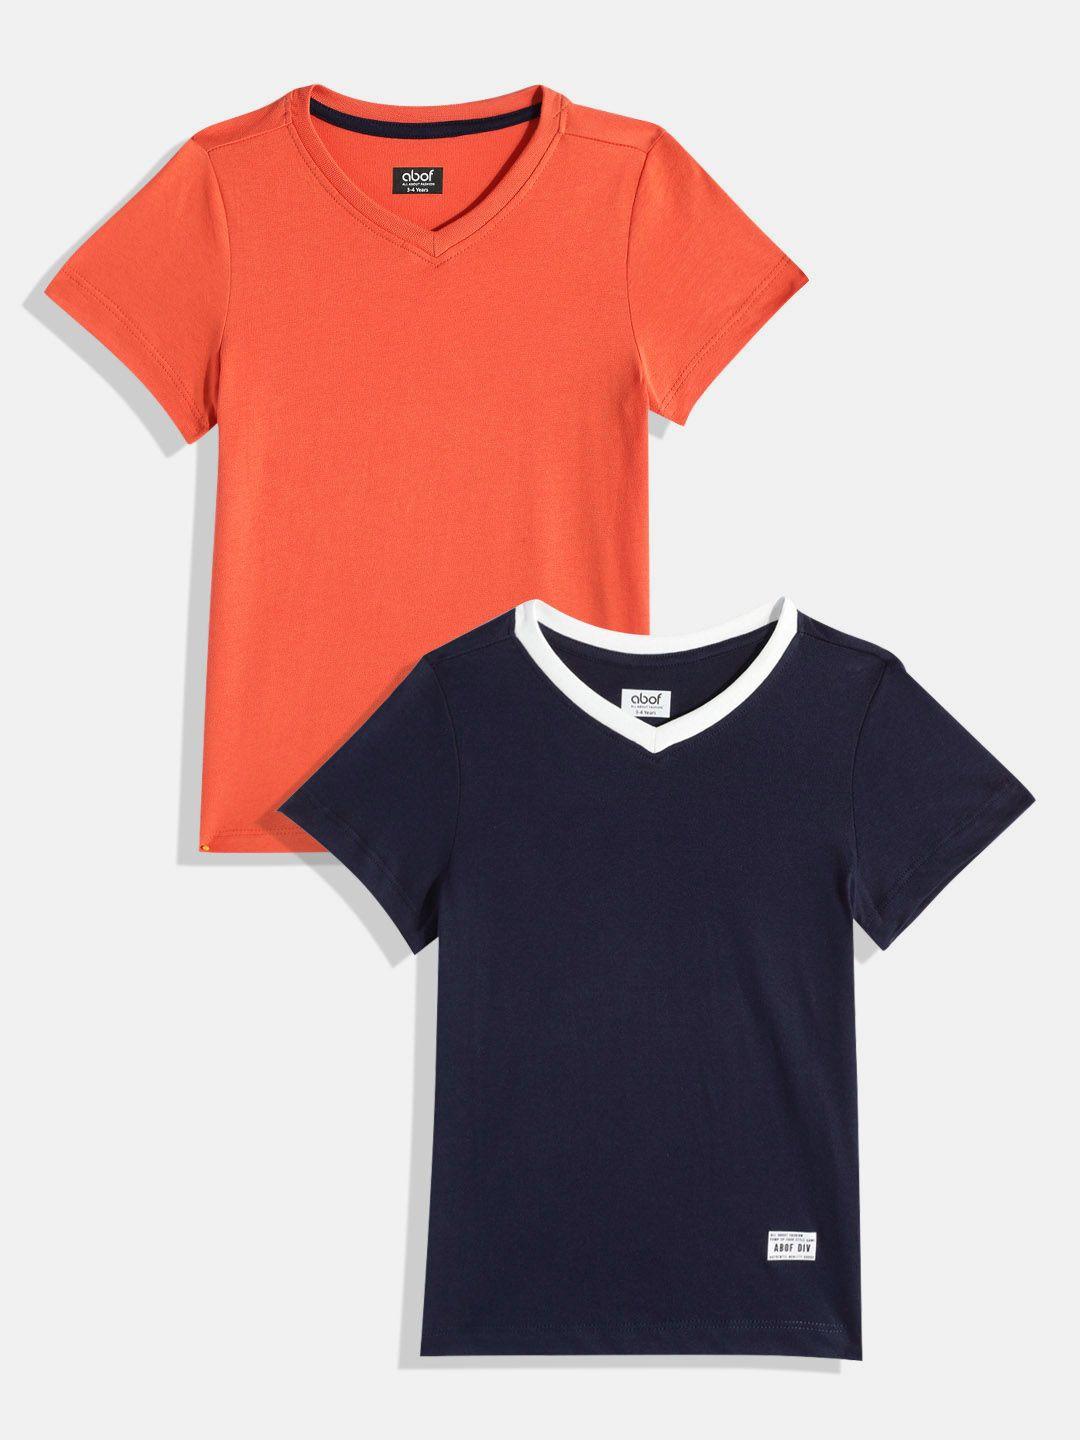 abof boys pack of 2 pure cotton t-shirts